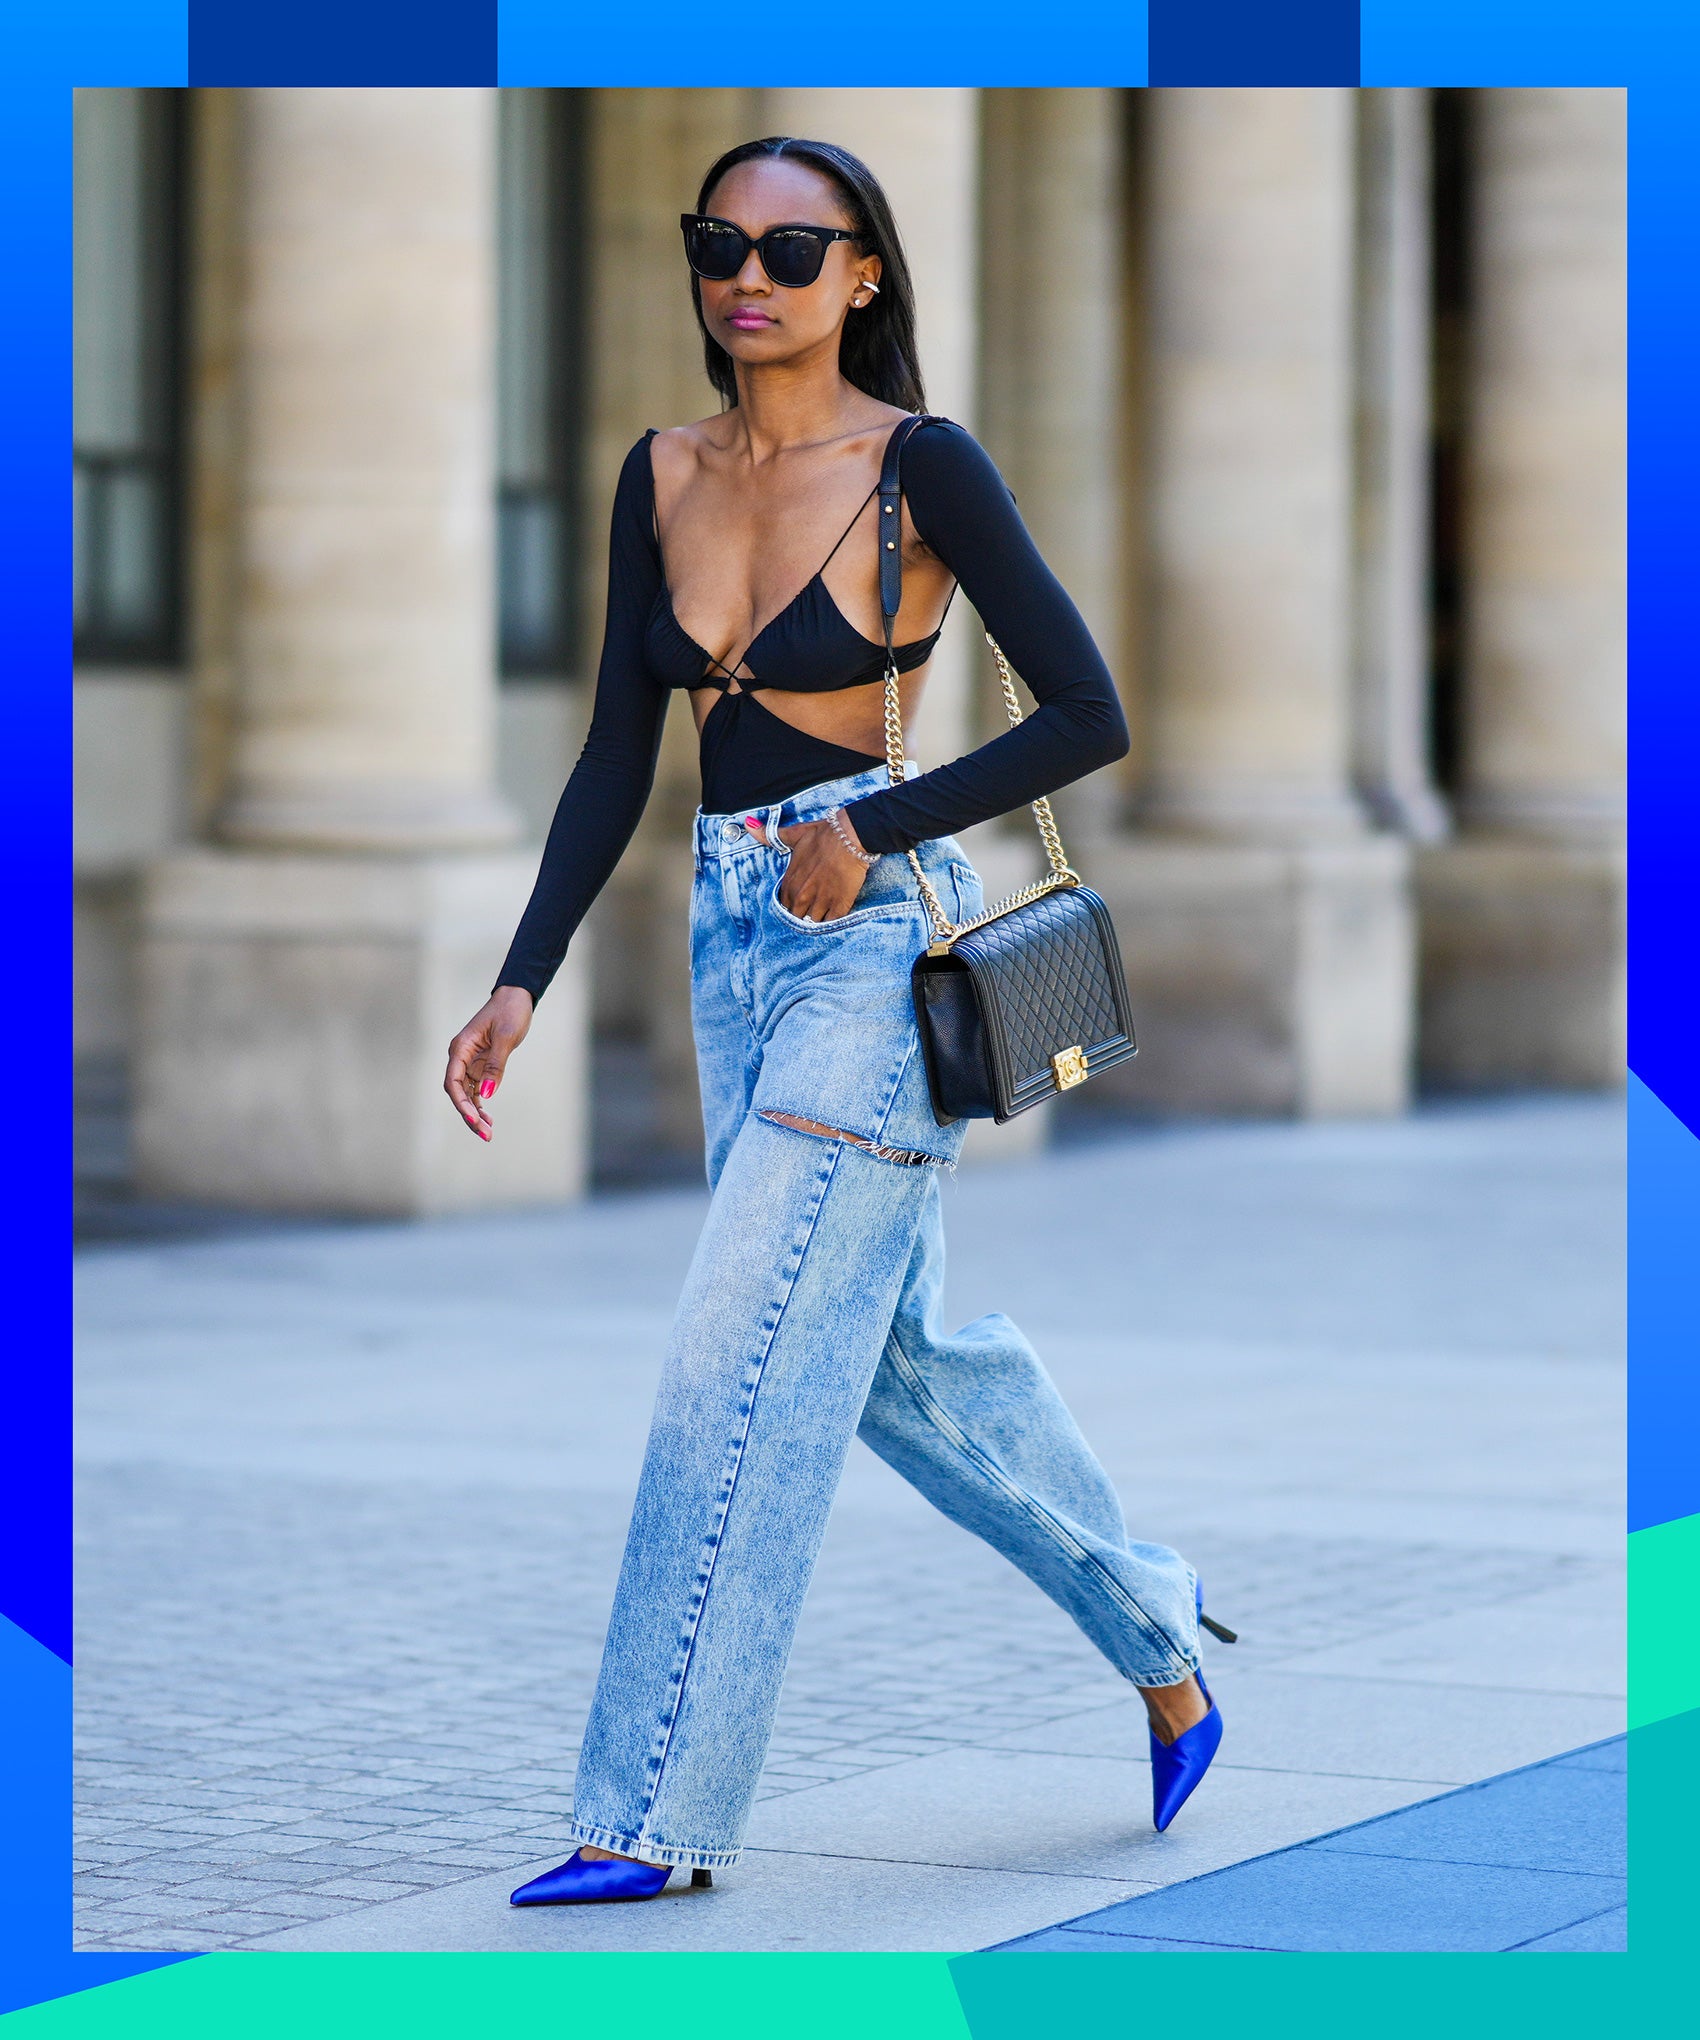 Double Waist High Rise Jeans: A Perfect Fall 2022 Trend